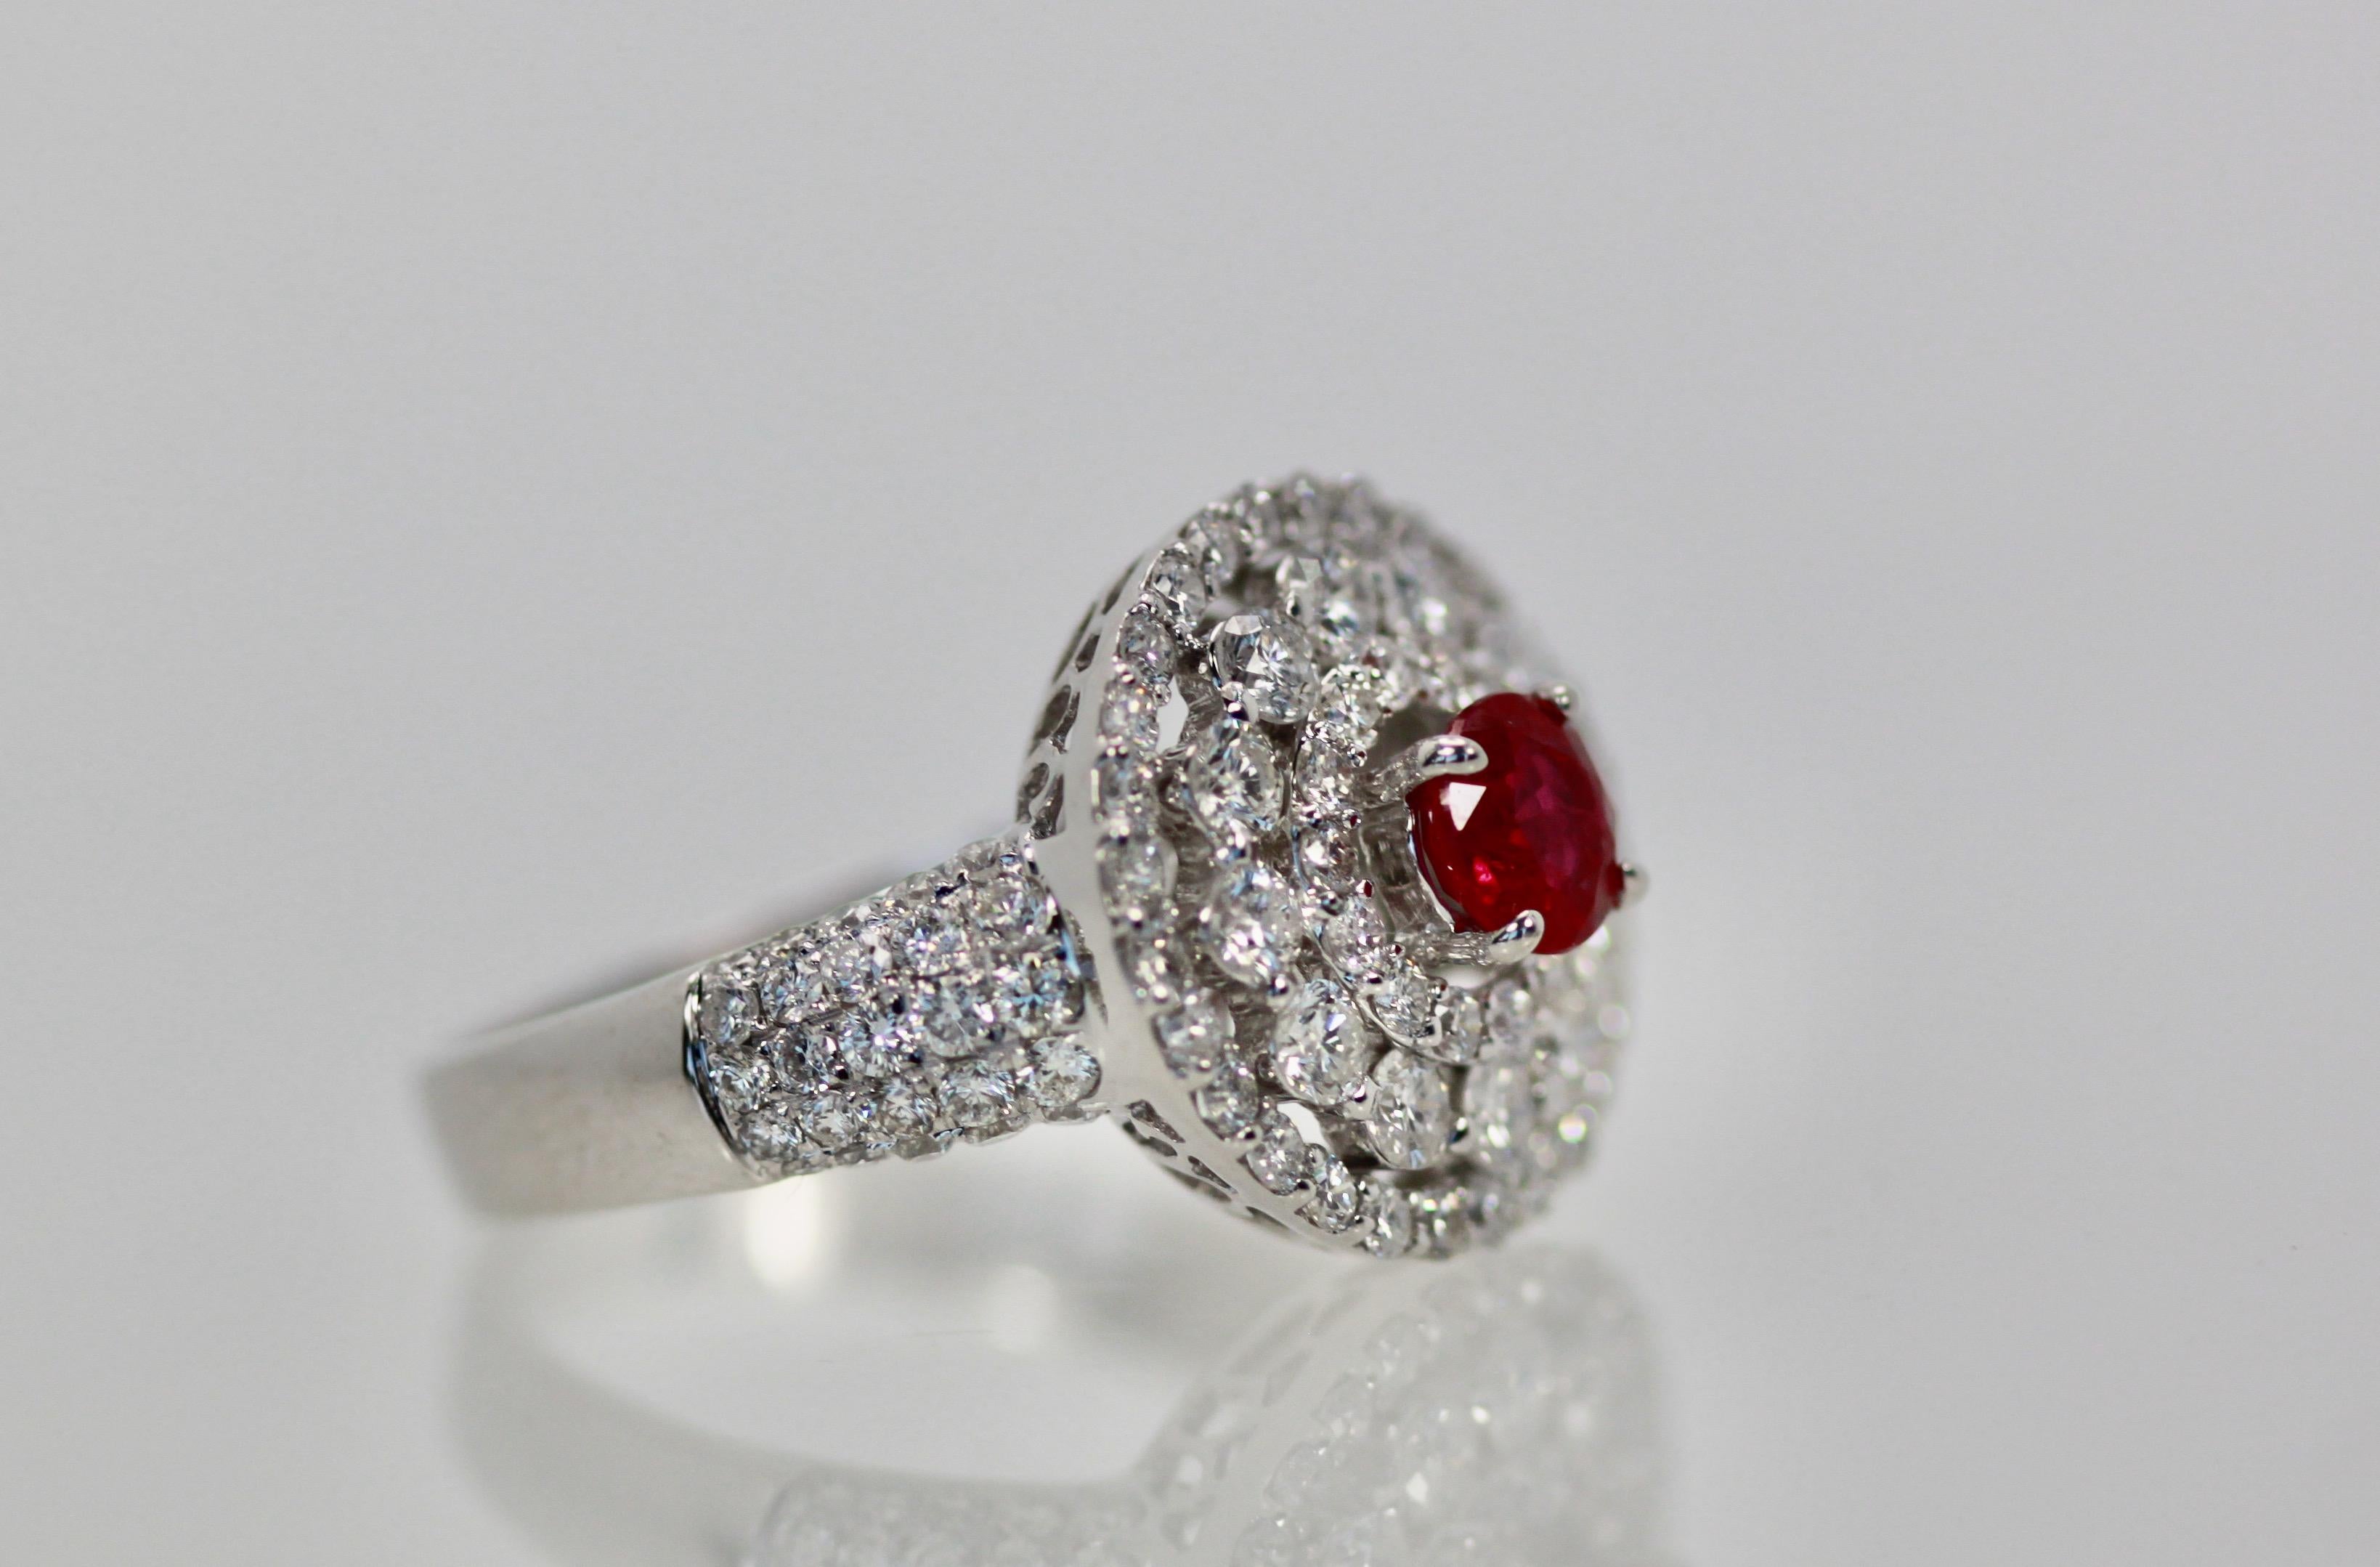 This lovely Target ring is covered in Diamonds color G, clarity VS-SI and it centers on a cherry red Ruby.  The rings is 15.16 mm round and the Ruby of approx. 0.60 carats, true cherry red.  This ring has bling but it is subtle but the Ruby is